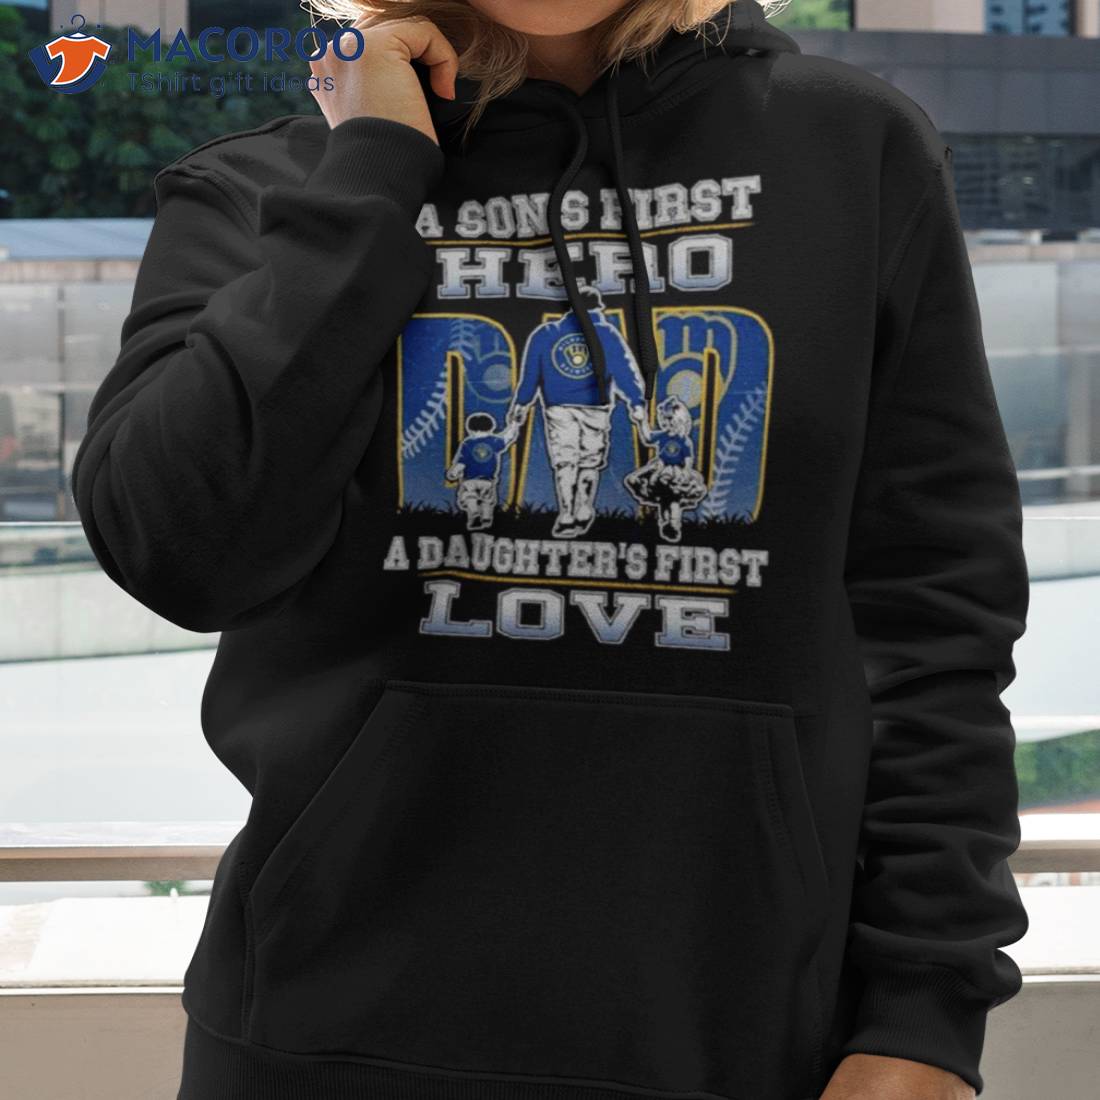 A son's first hero a daughter's first love Milwaukee brewers Shirt - Bring  Your Ideas, Thoughts And Imaginations Into Reality Today